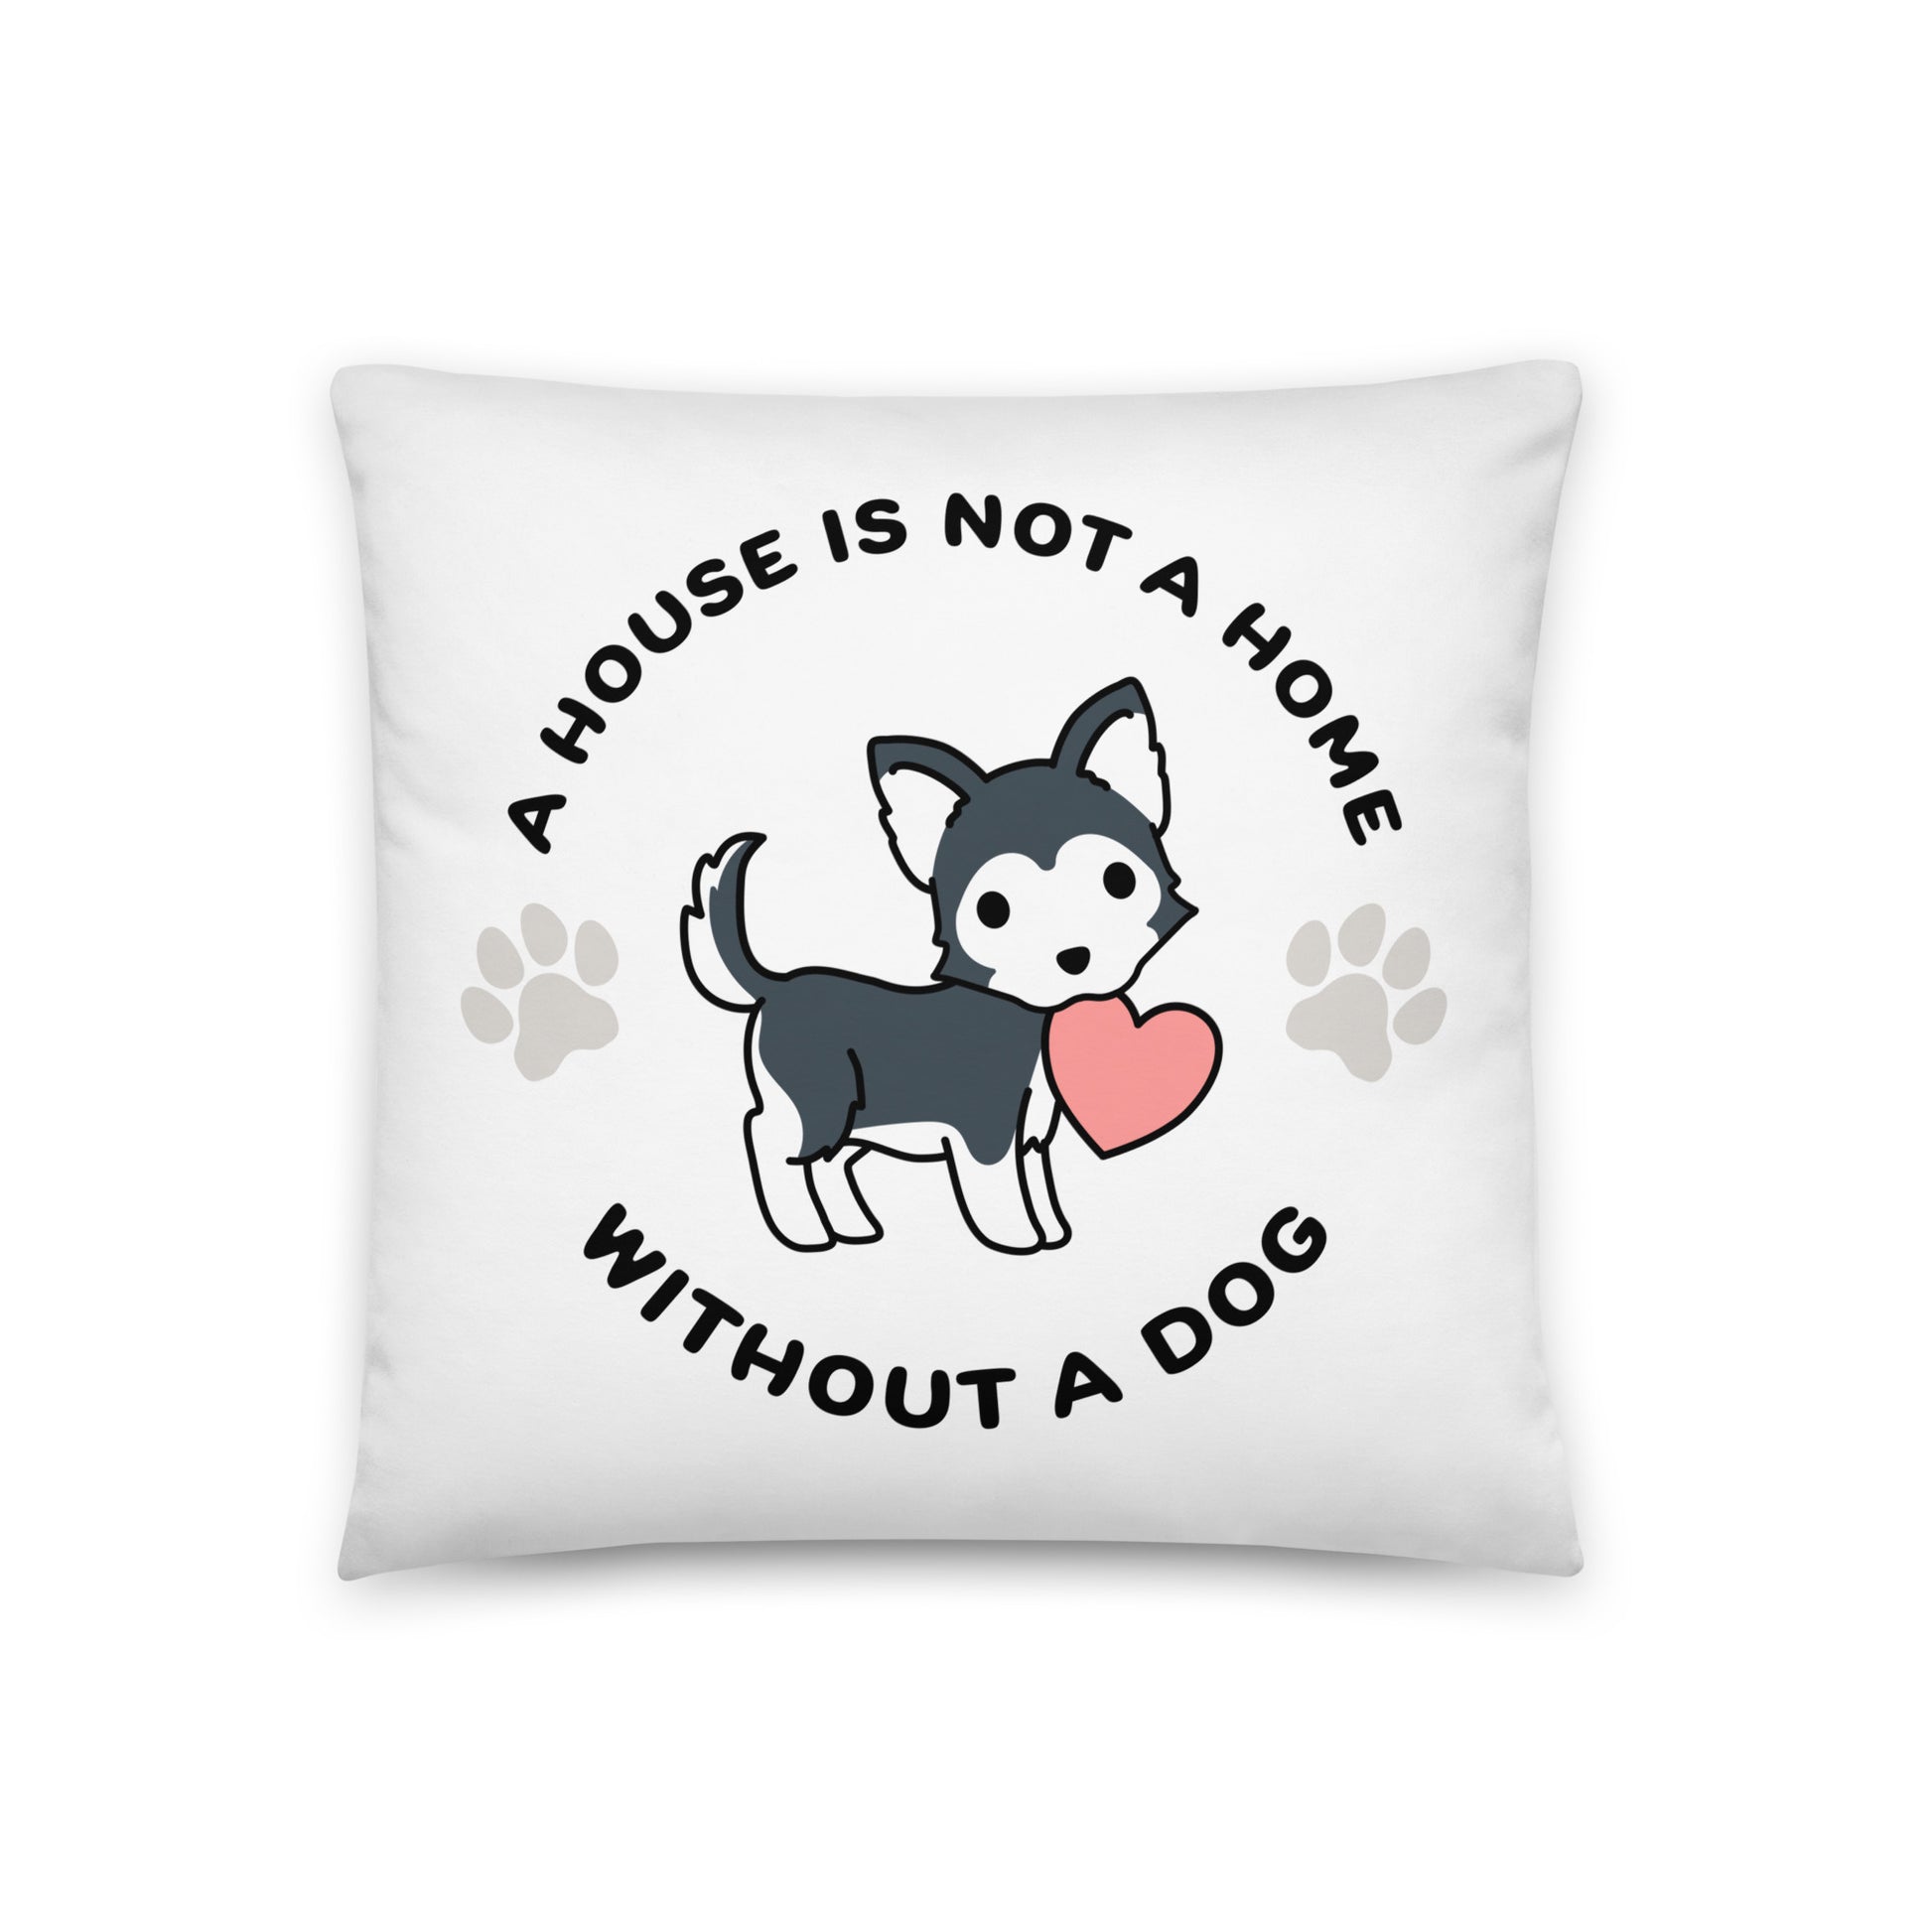 A white, 18" x 18" pillow featuing a cute, stylized illustration of a Husky holding a heart in its mouth. Text in a circle around the dog reads "A house is not a home without a dog"